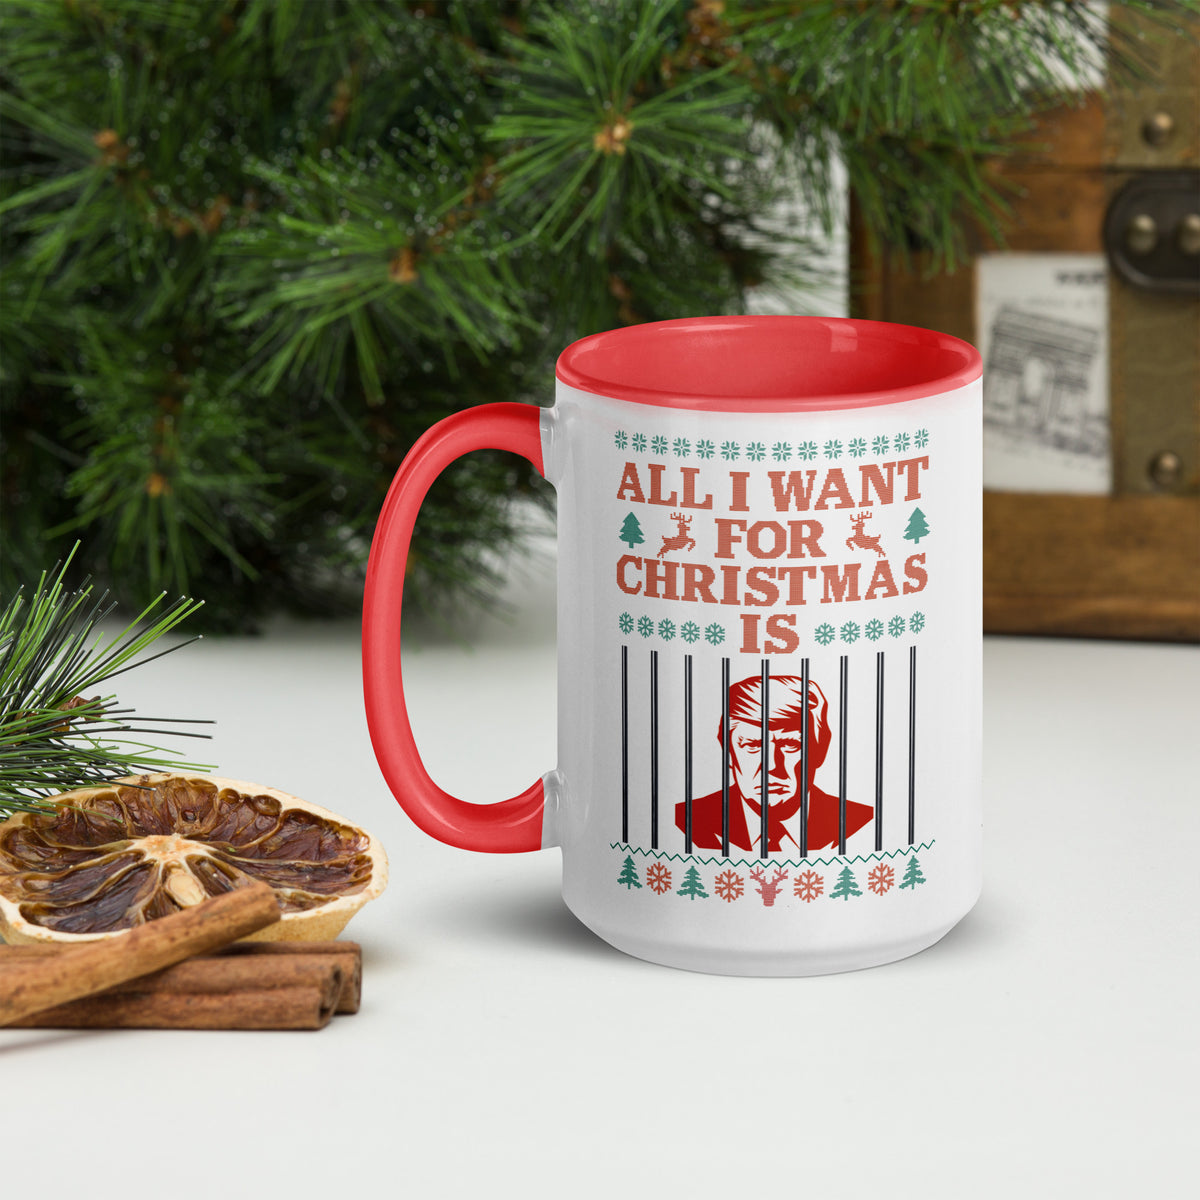 All I Want For Christmas is Trump in Jail Mug